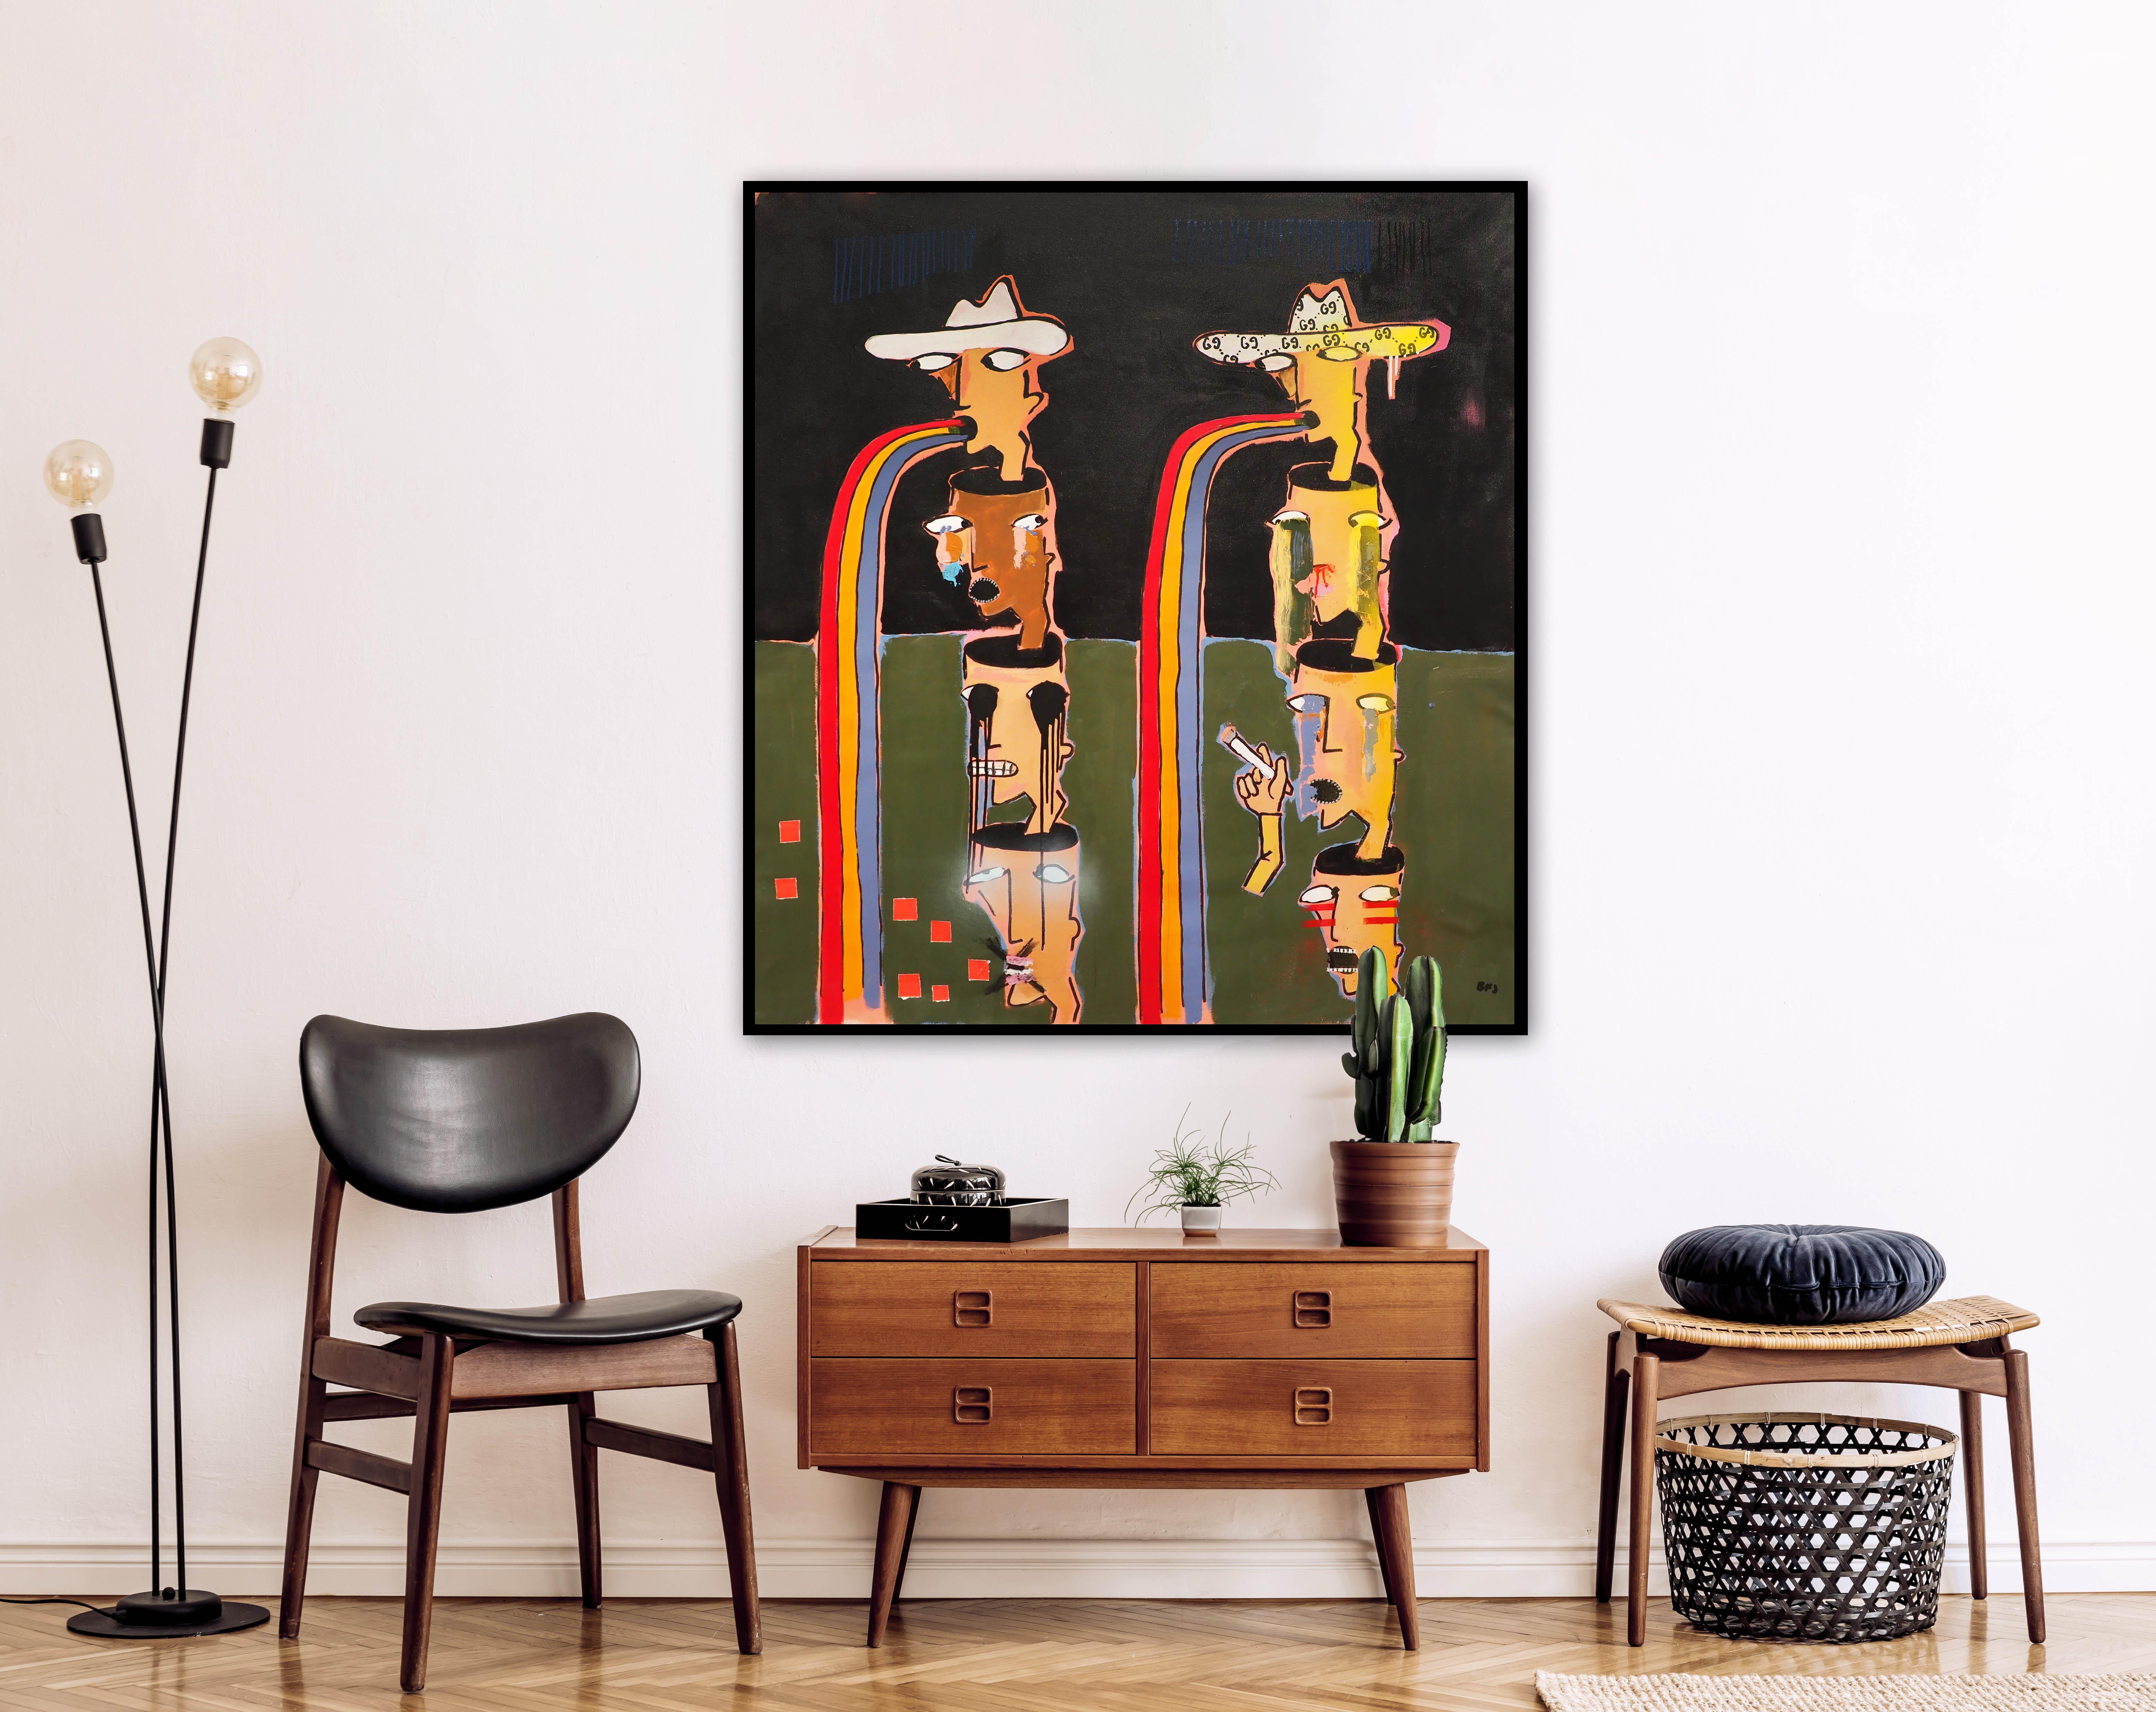 Two Cowboys portrays a desert night scene with eight minimalistic cowboy figurines placed on top of each other on an unstretched canvas. Using bold, confident strokes, Brandon Jones suggests the importance of imagination and sharing stories of